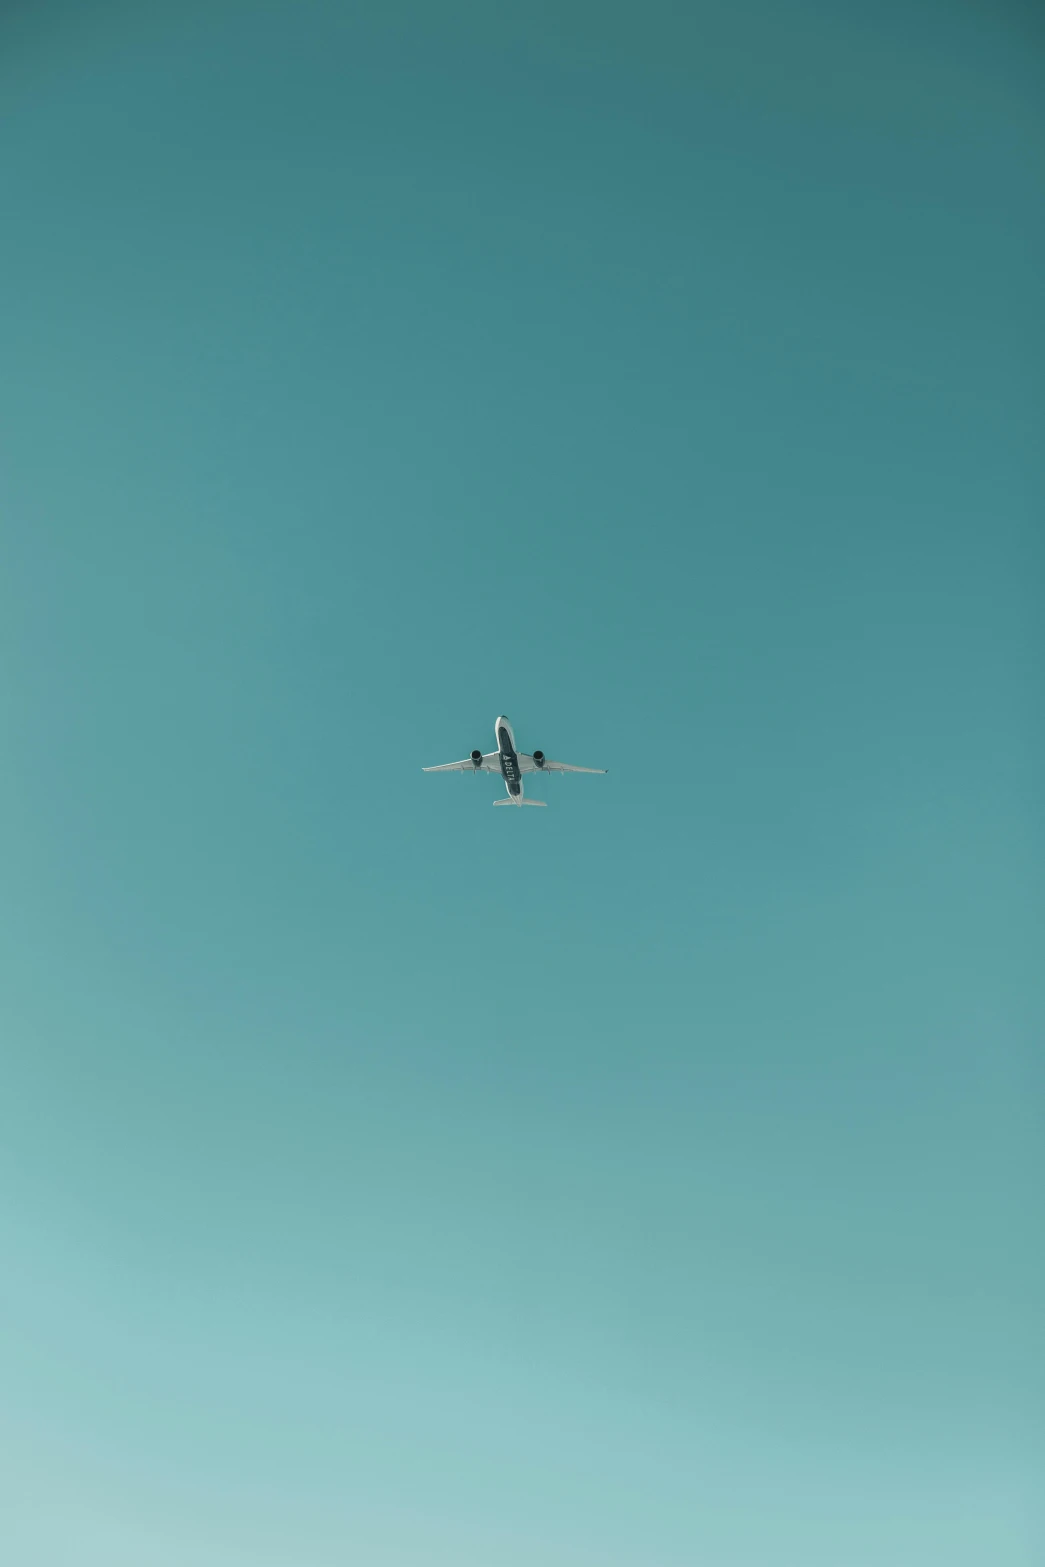 a large jetliner flying through a blue sky, by Matthias Weischer, postminimalism, # film, minimalistic!! simple, alessio albi, moody : : wes anderson